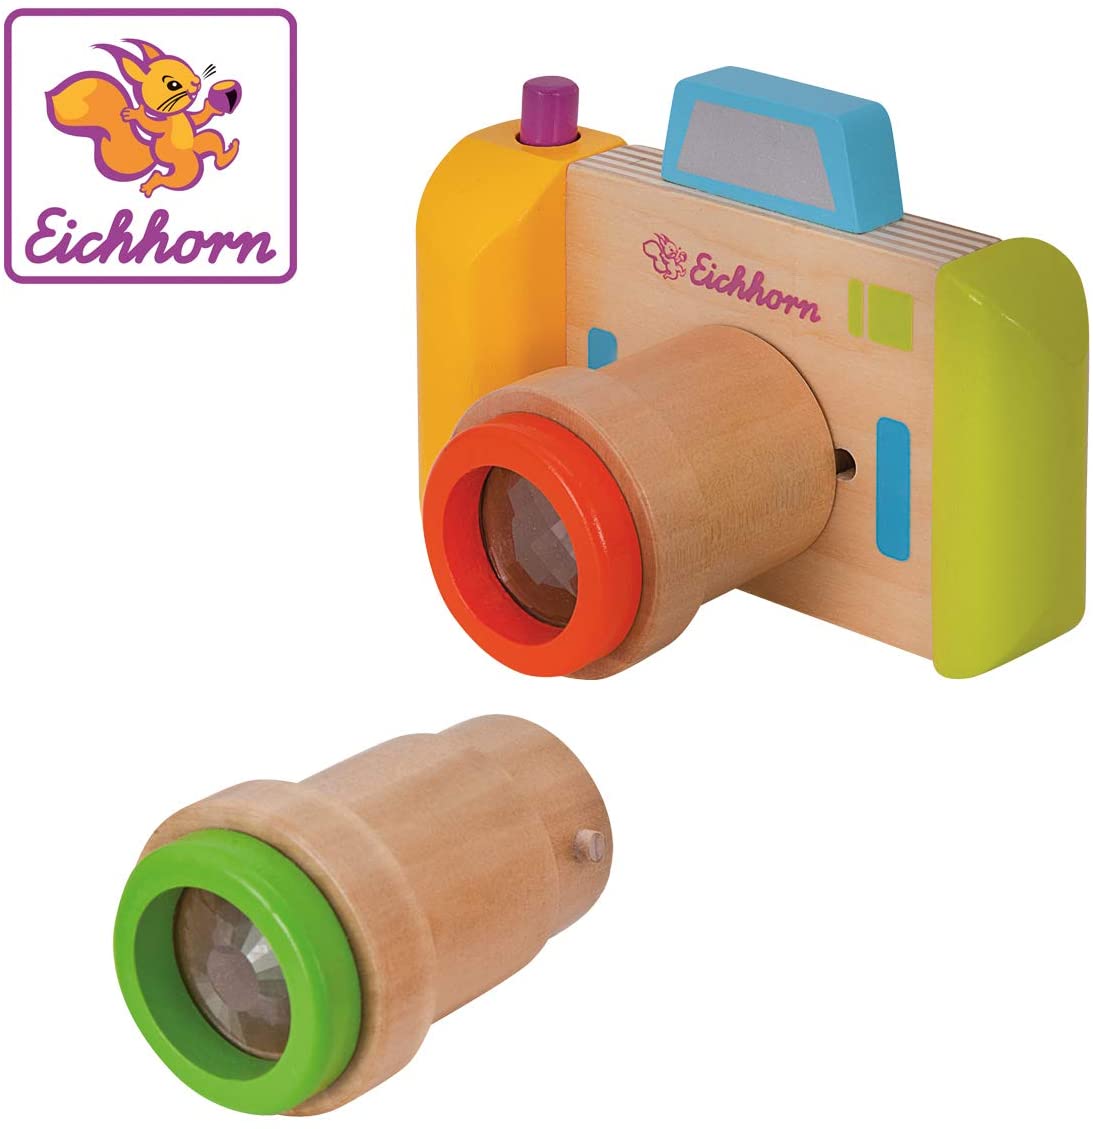 Eichhorn 100003460 Kaleidoscope, 3 parts, camera and 2 lenses, material, suitable for children from one year old, birch plywood, BSK, 1J+, colourful, 12.5 x 9 x 7.5 cm